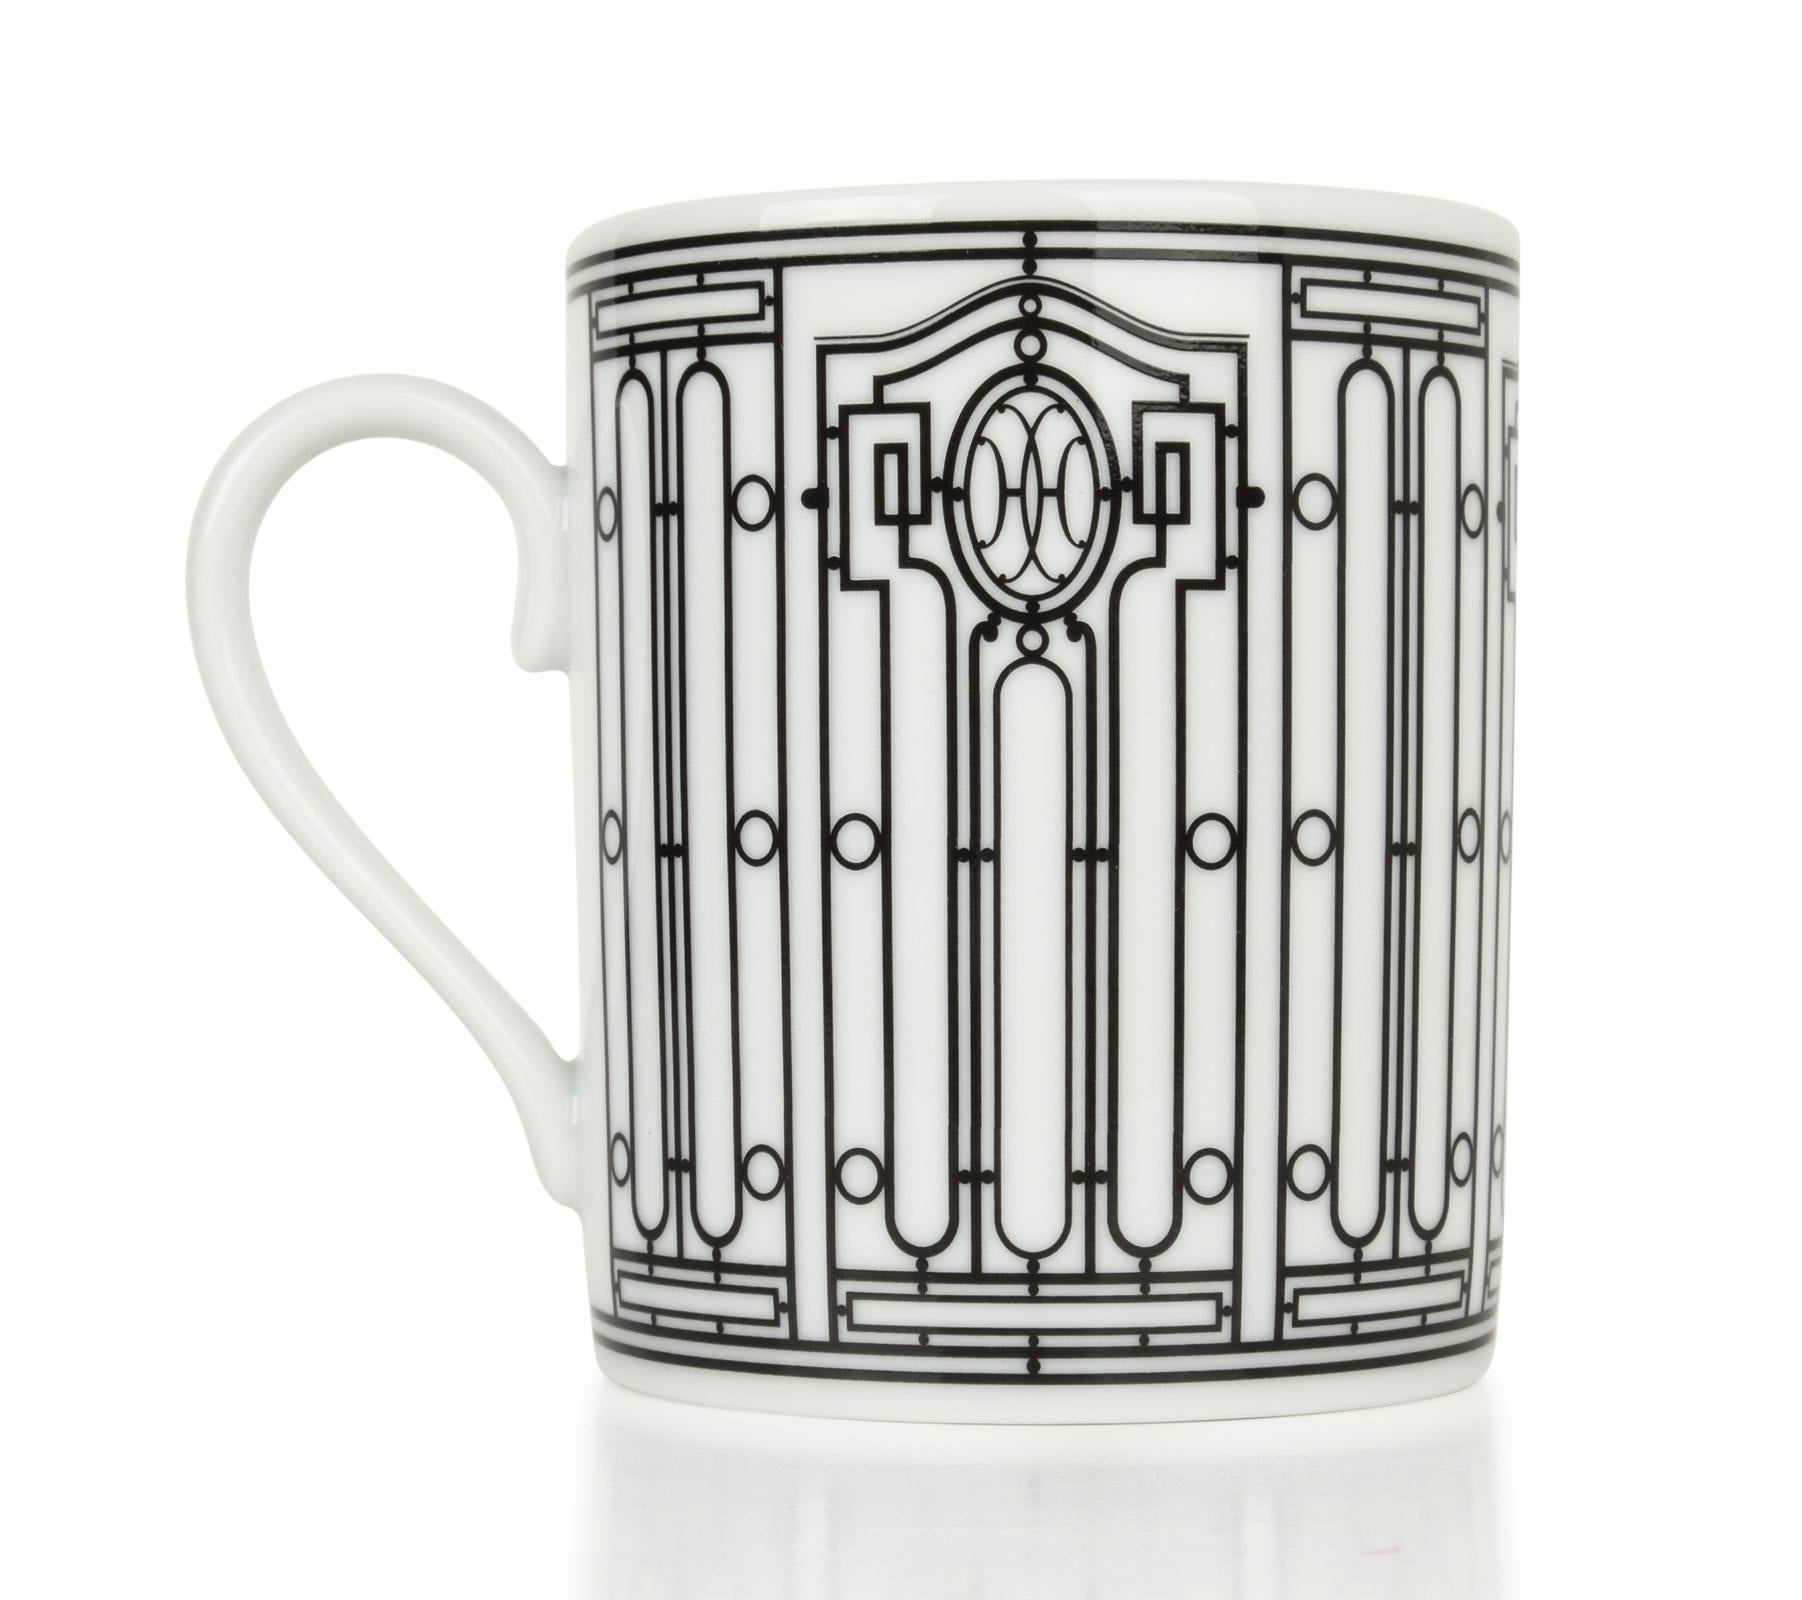 Guaranteed authentic set of four (4) Hermes H Deco mugs featured in white with black.
Features Art Deco wrought-iron friezes.
Each 10 oz mug is porcelain.
All are Deco themed in design.
Each mug comes with signature Hermes box and ribbon.
NEW or